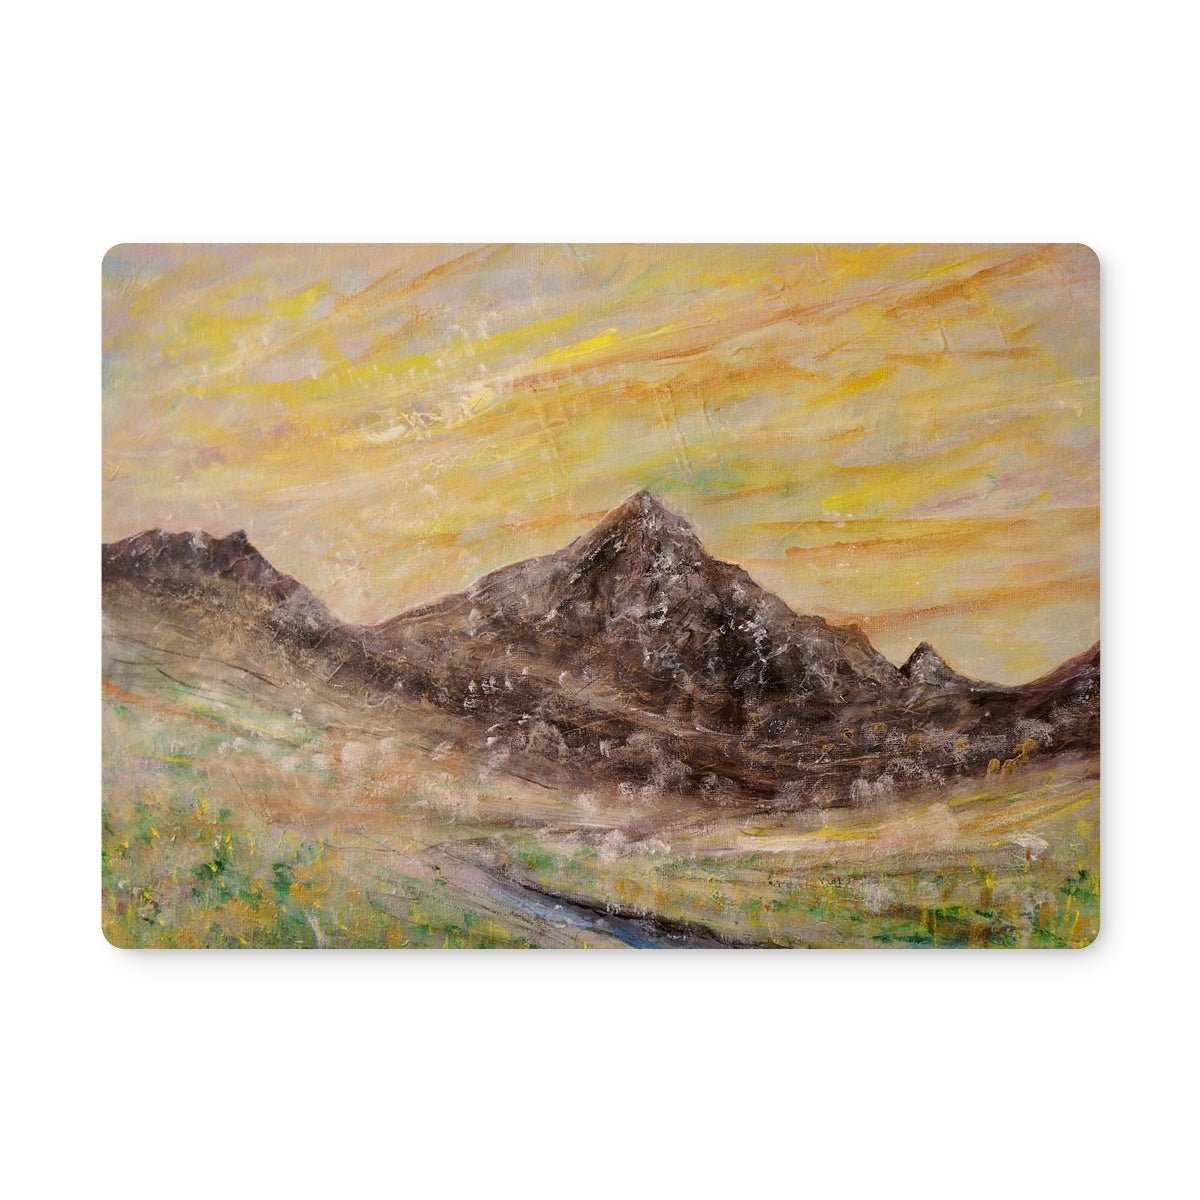 Glen Rosa Mist Arran Art Gifts Placemat-Placemats-Arran Art Gallery-2 Placemats-Paintings, Prints, Homeware, Art Gifts From Scotland By Scottish Artist Kevin Hunter